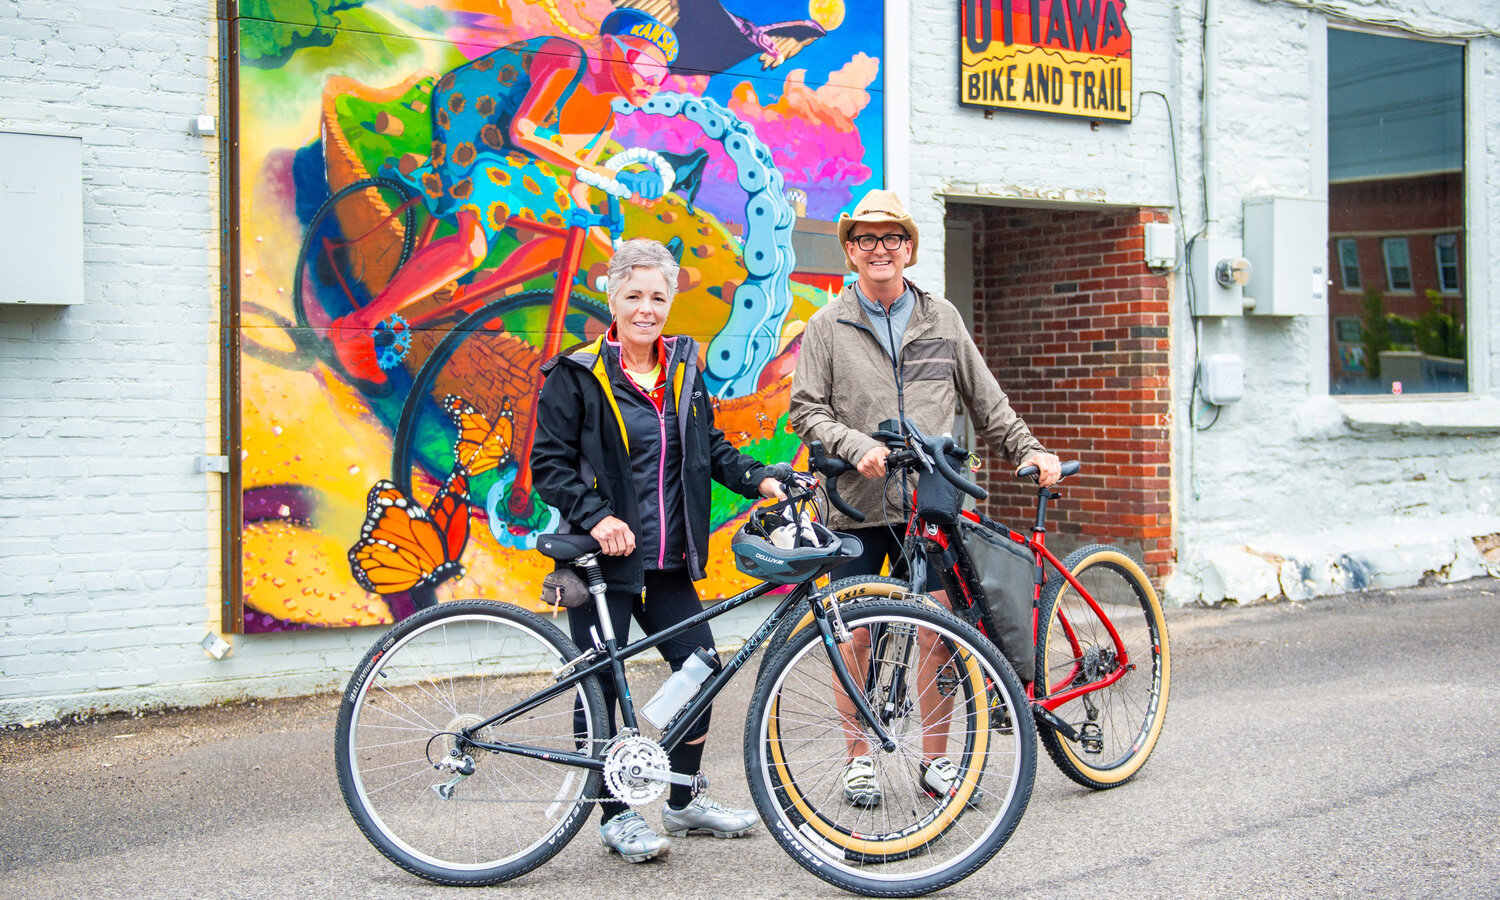 Cynthia Lane (left), a two-time graduate of Pittsburg State University, joined Dan Shipp (right) on Day 2 of the "Dan Bikes Kansas" campaign. Lane is the chair of the Kansas Governor's Council on Education and serves on the Kansas Board of Regents, the governing body of higher education in Kansas. "Dan Bikes Kansas" will take Shipp across 800 miles of Kansas over the course of 12 days. The goal of the campaign is to raise $8 million in student scholarships, as well as give Shipp the chance to connect with Kansans across the state.